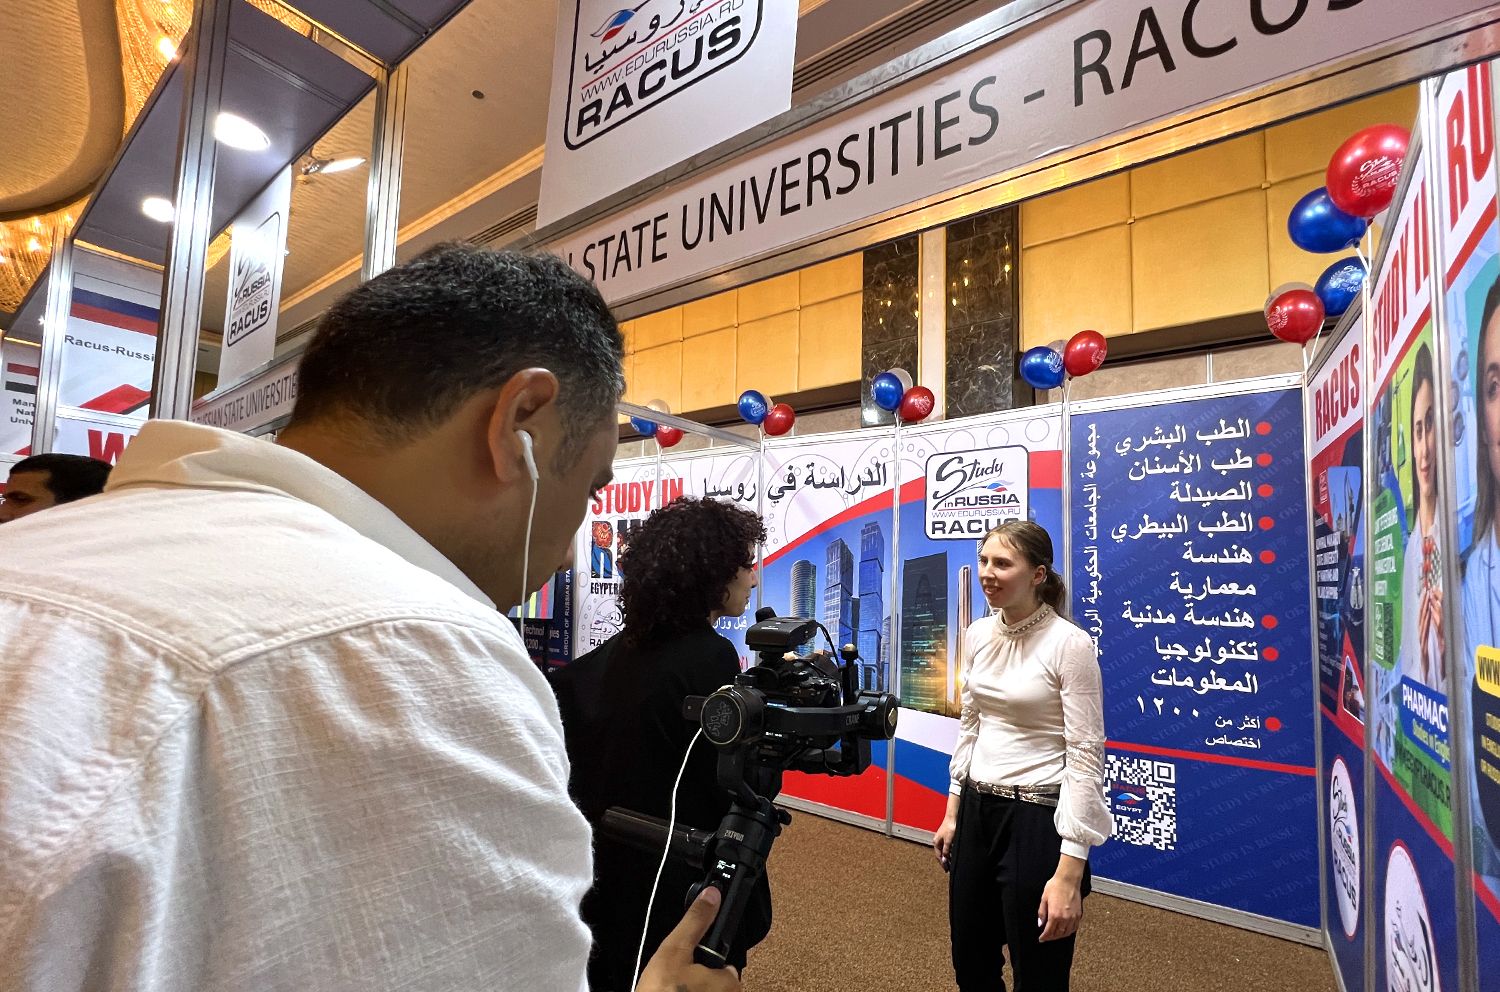 Foreign student service manager Aya Bakh gave an interview to the Egyptian television about studies in Russia and the work of the organisation at the exhibition.